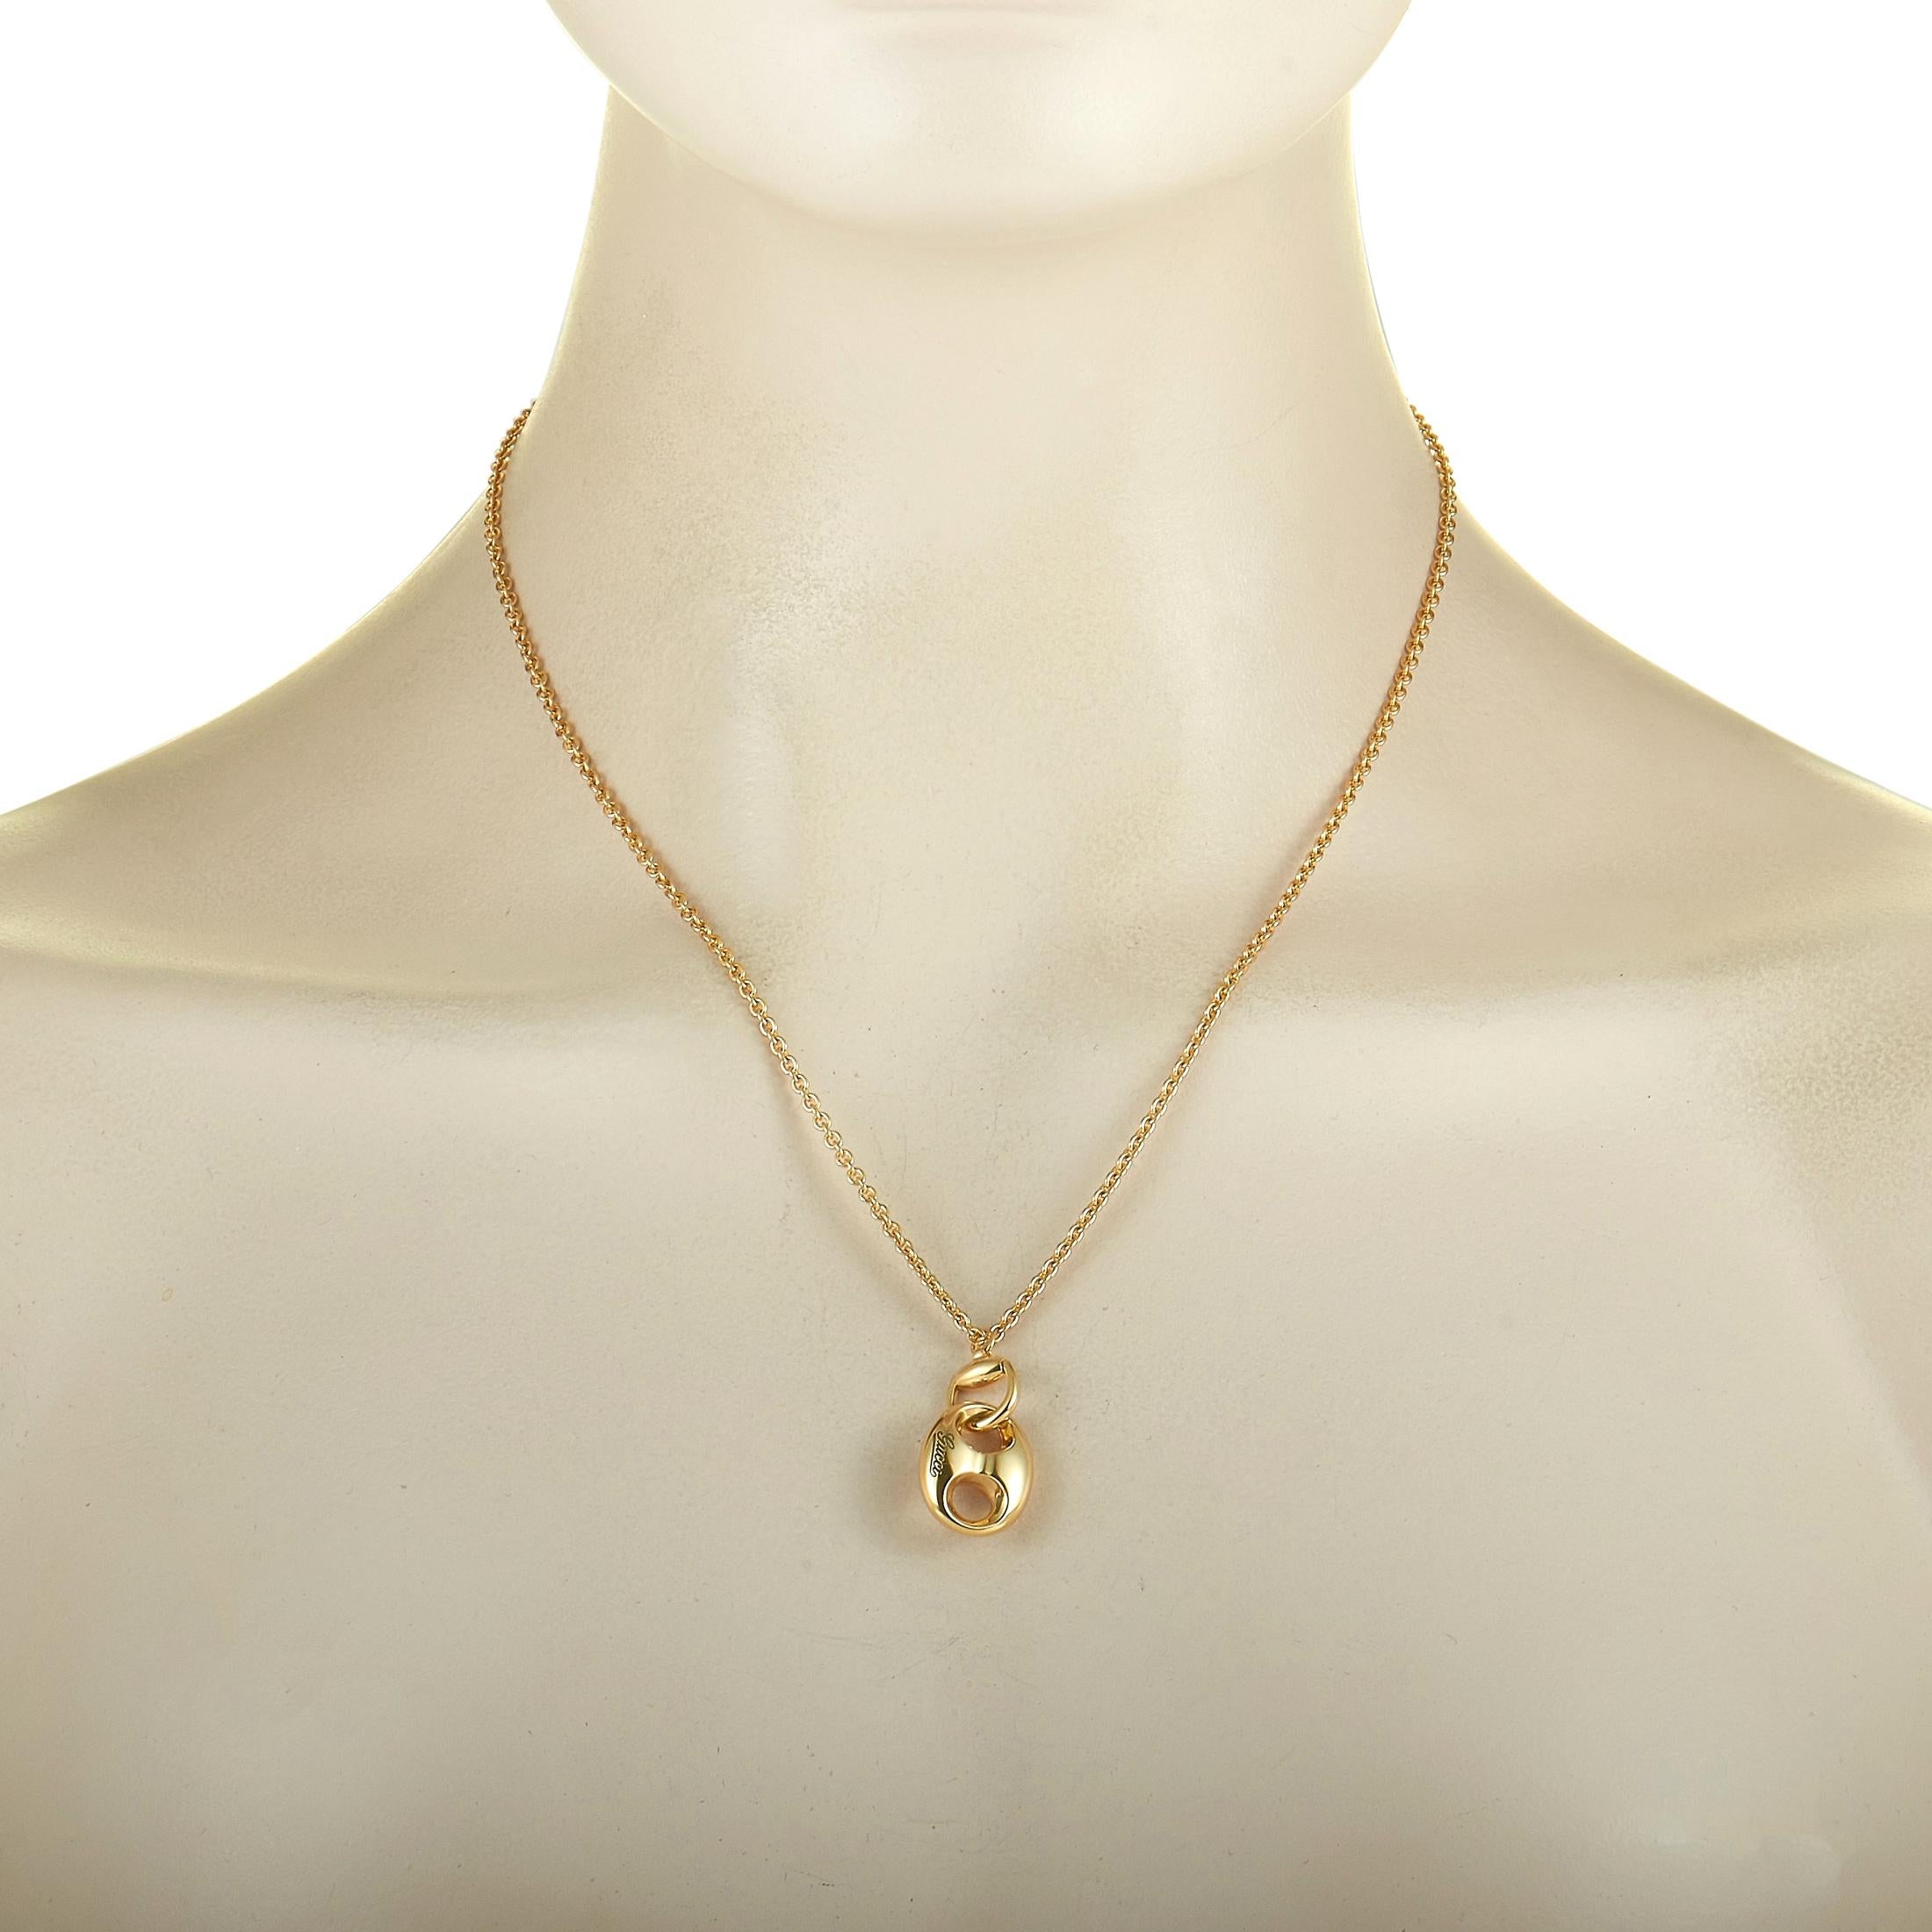 This Gucci necklace is crafted from 18K yellow gold and weighs 13 grams. It boasts an 18” chain and a pendant that measures 1” in length and 0.60” in width.
 
 The necklace is offered in brand new condition and includes the manufacturer’s box and